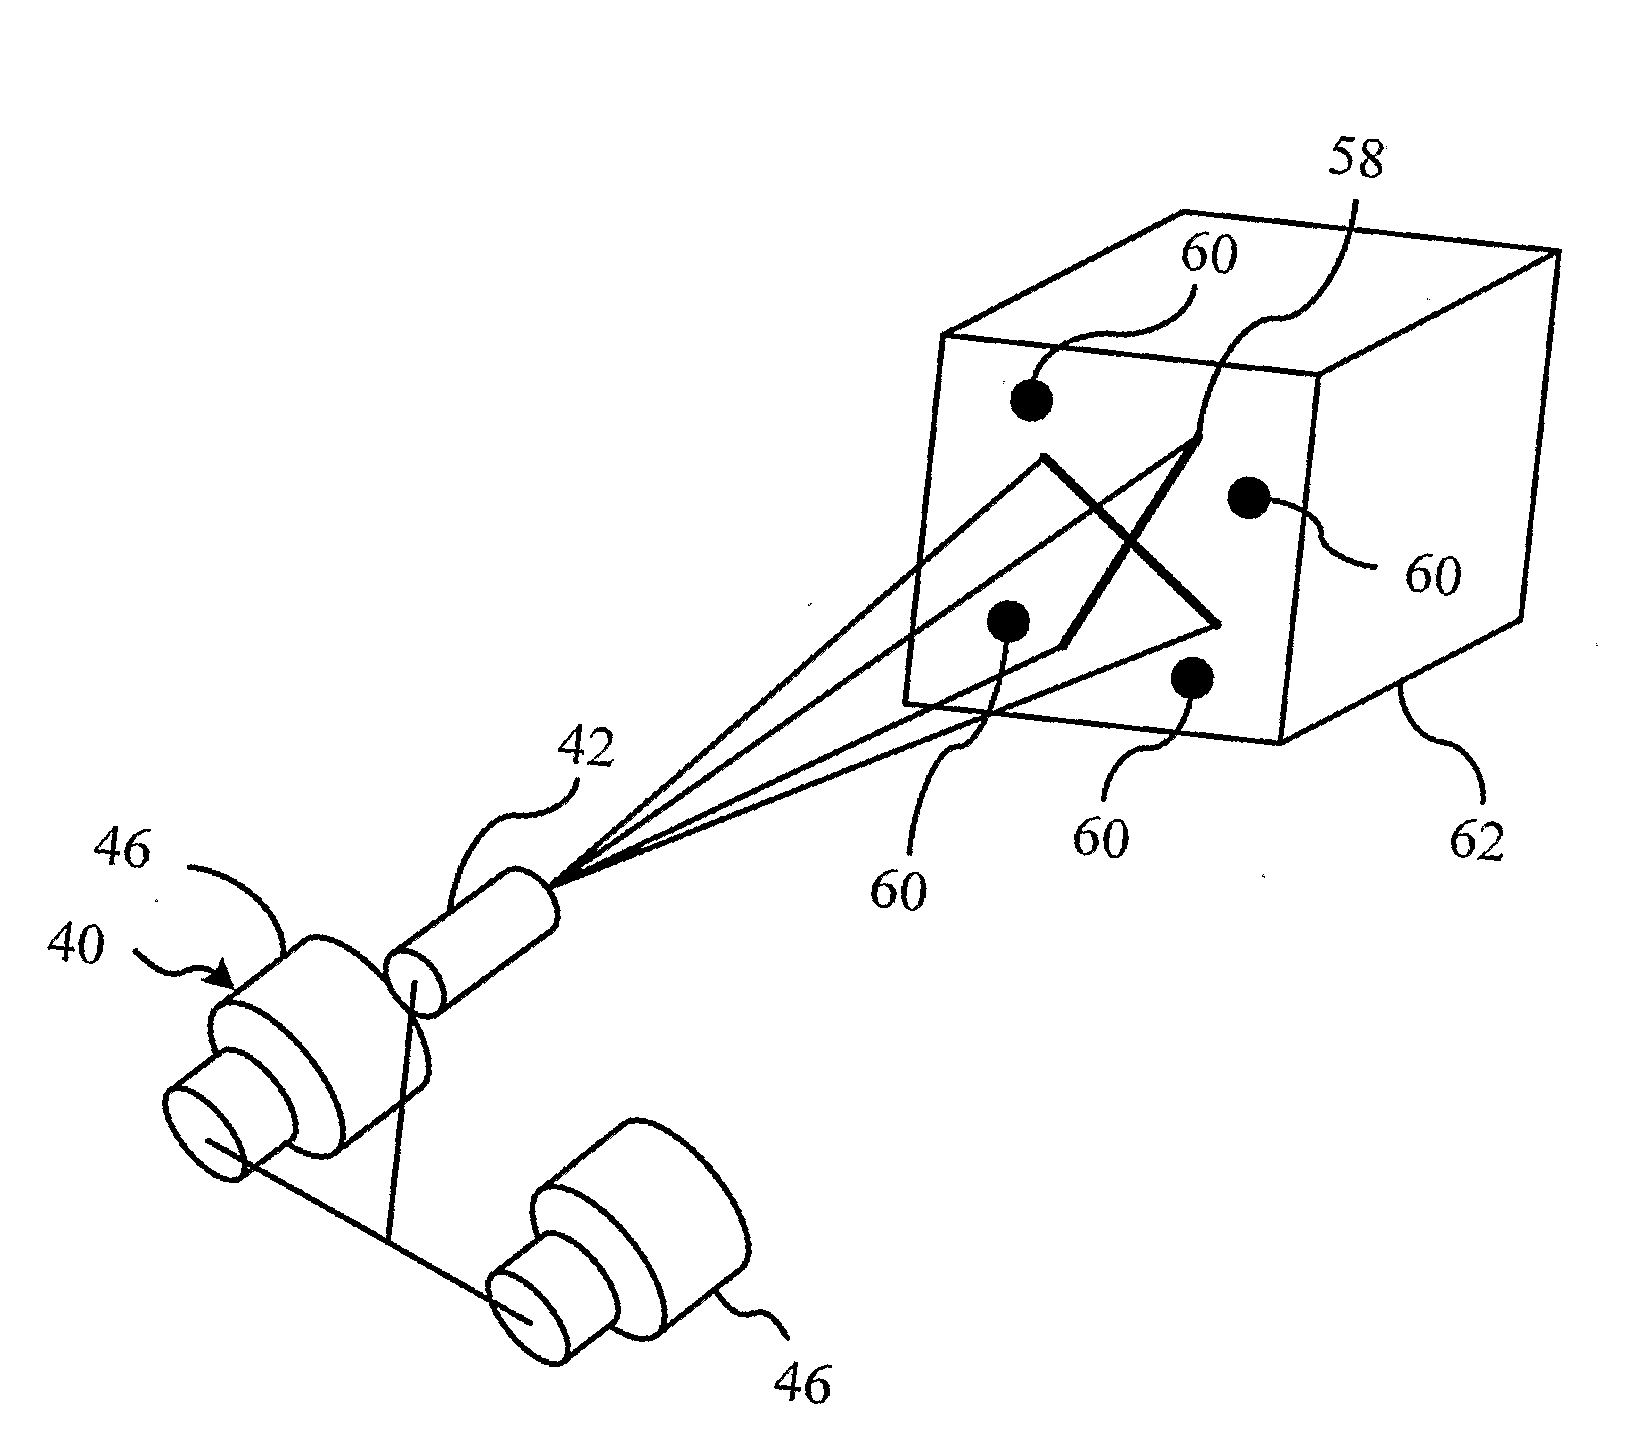 Auto-Referenced System and Apparatus for Three-Dimensional Scanning